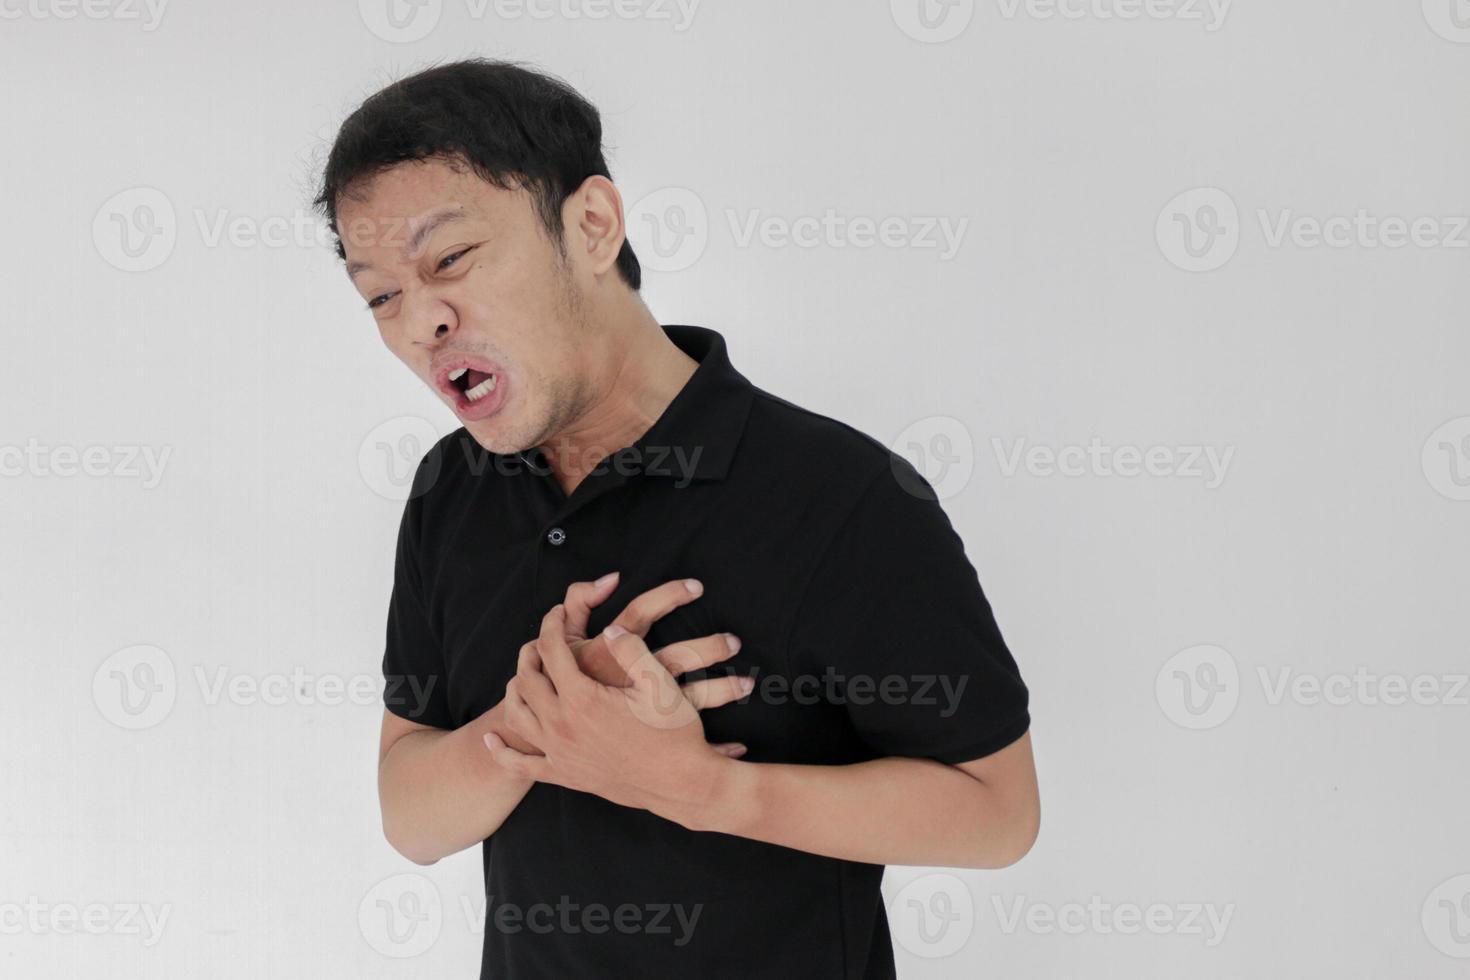 Heart attack or broken heart of young asian man with hurt emotion wear black shirt photo